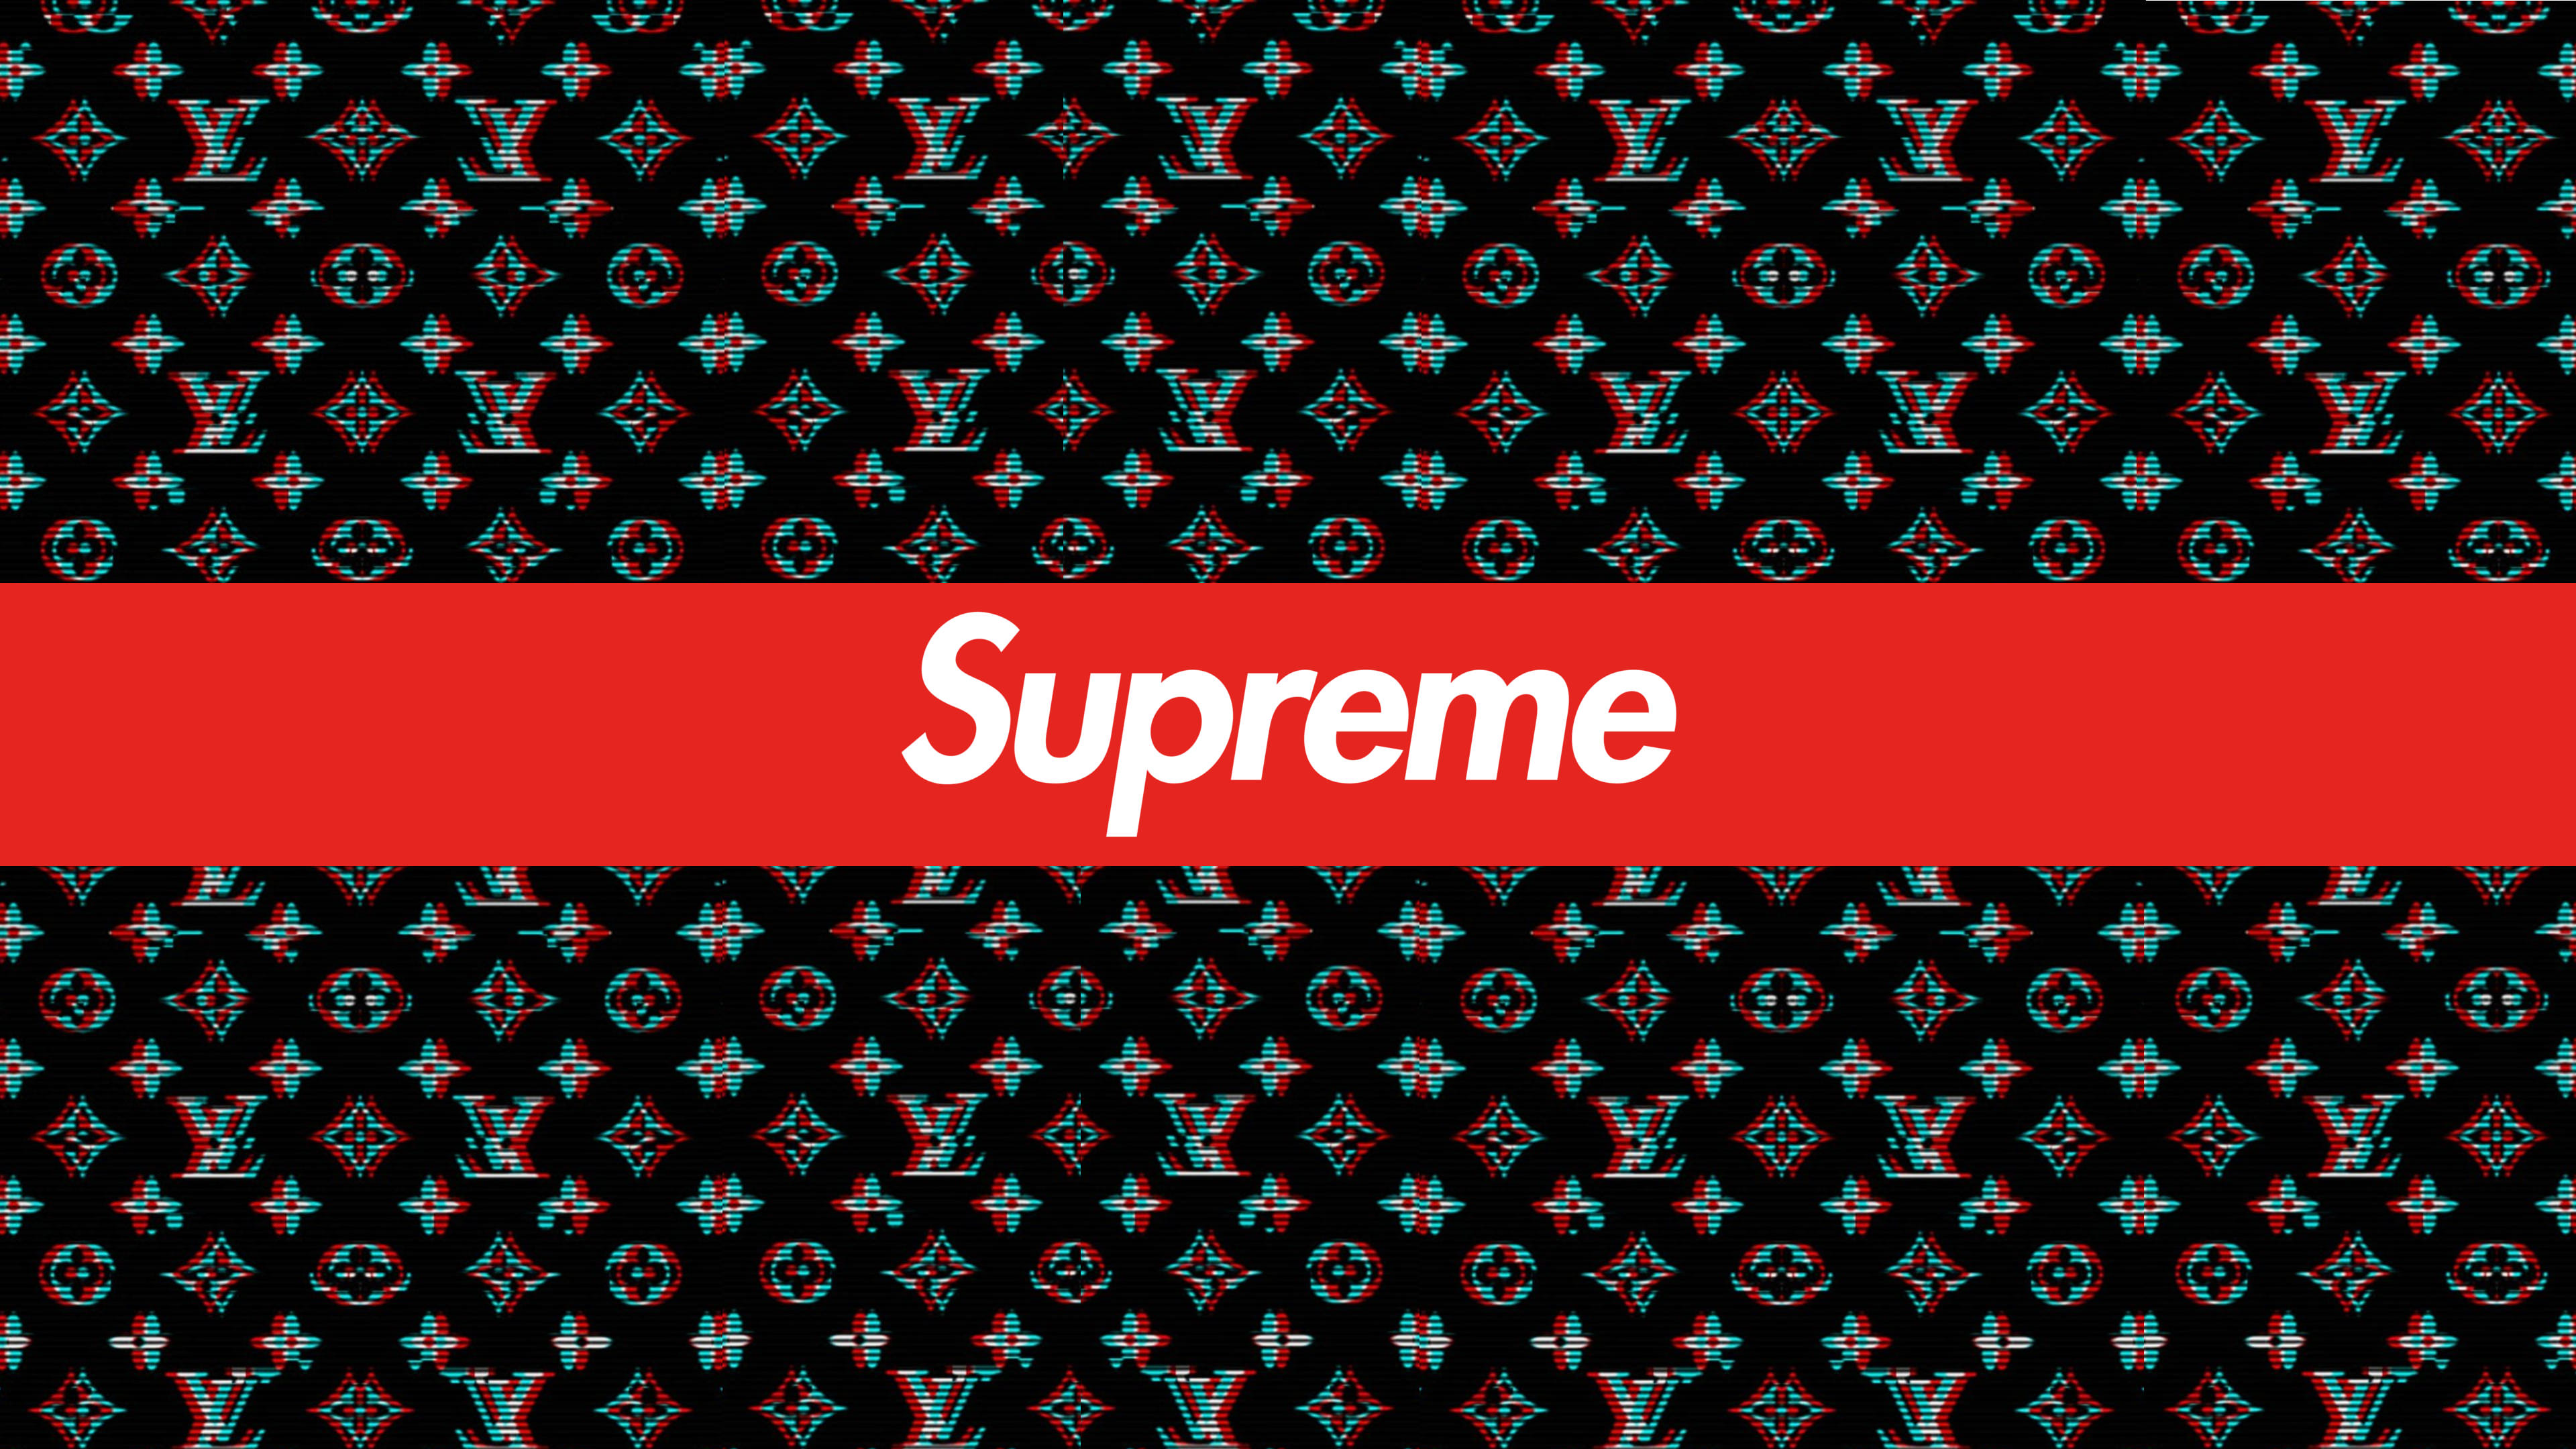 Supreme Desktop Wallpapers Wallpaper Cave The only right place to download 77+ original supreme wallpapers 4k full free for your desktop backgrounds. supreme desktop wallpapers wallpaper cave